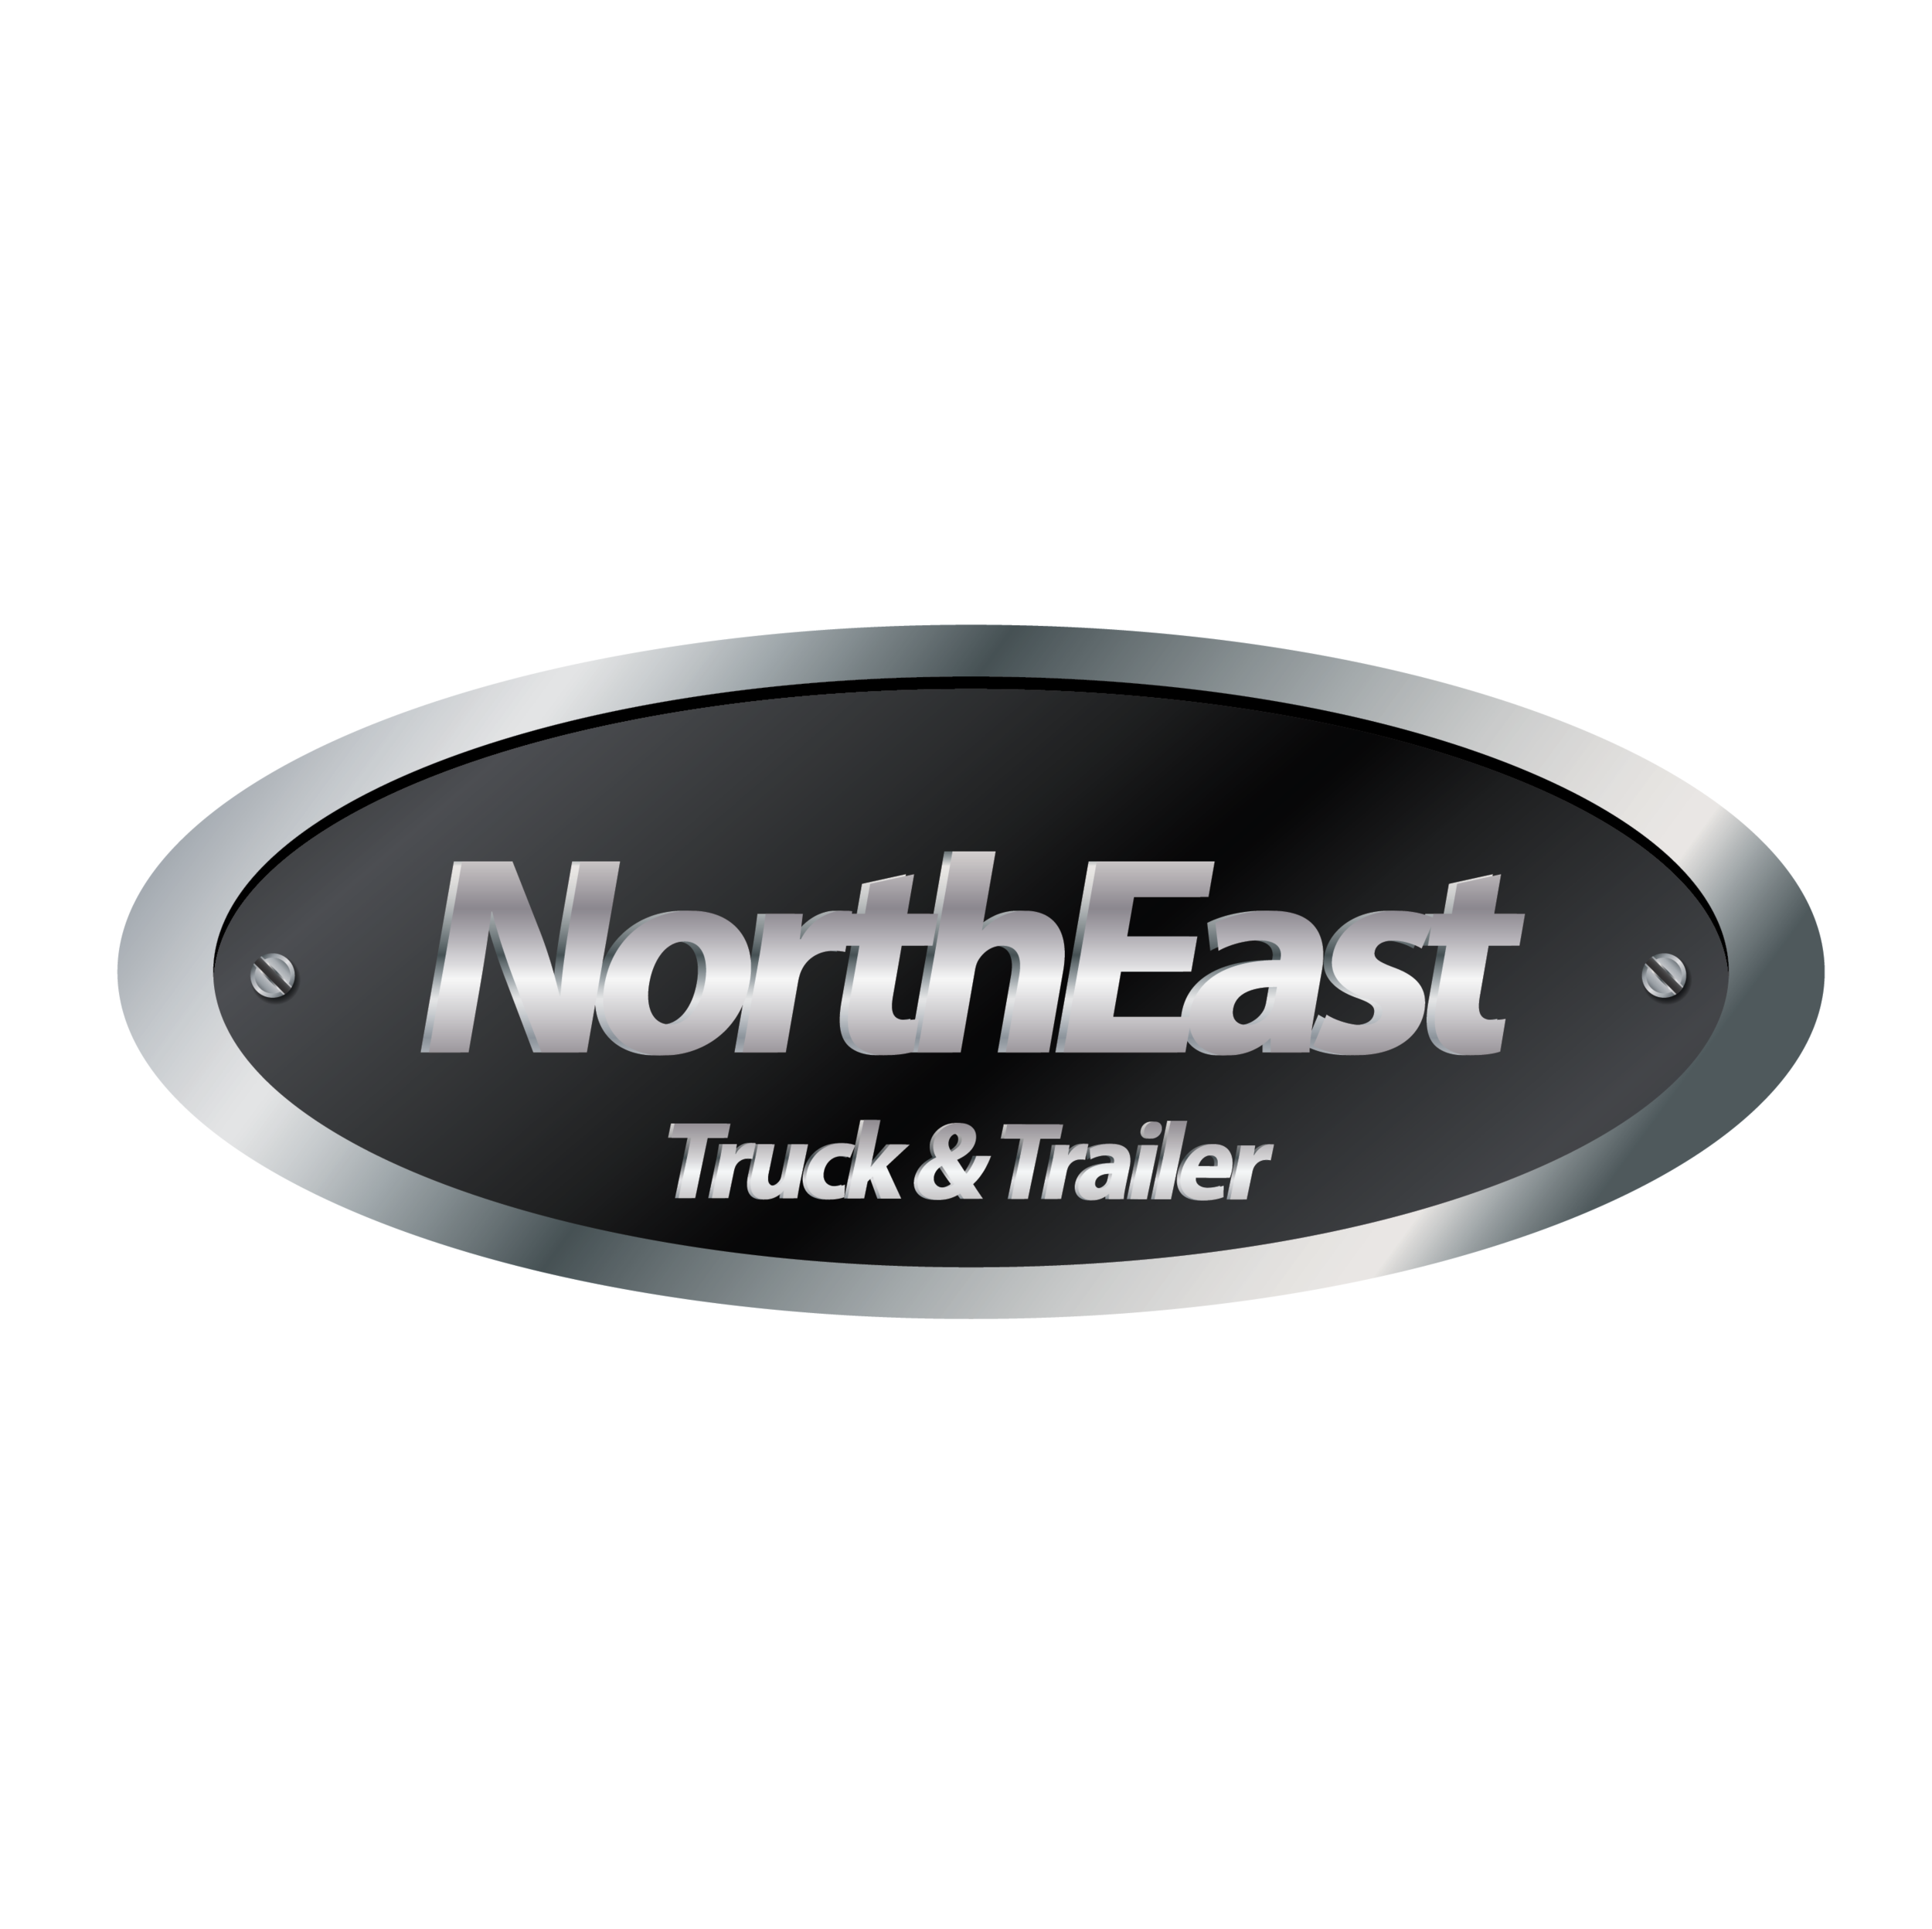 North East Truck & Trailer Sales